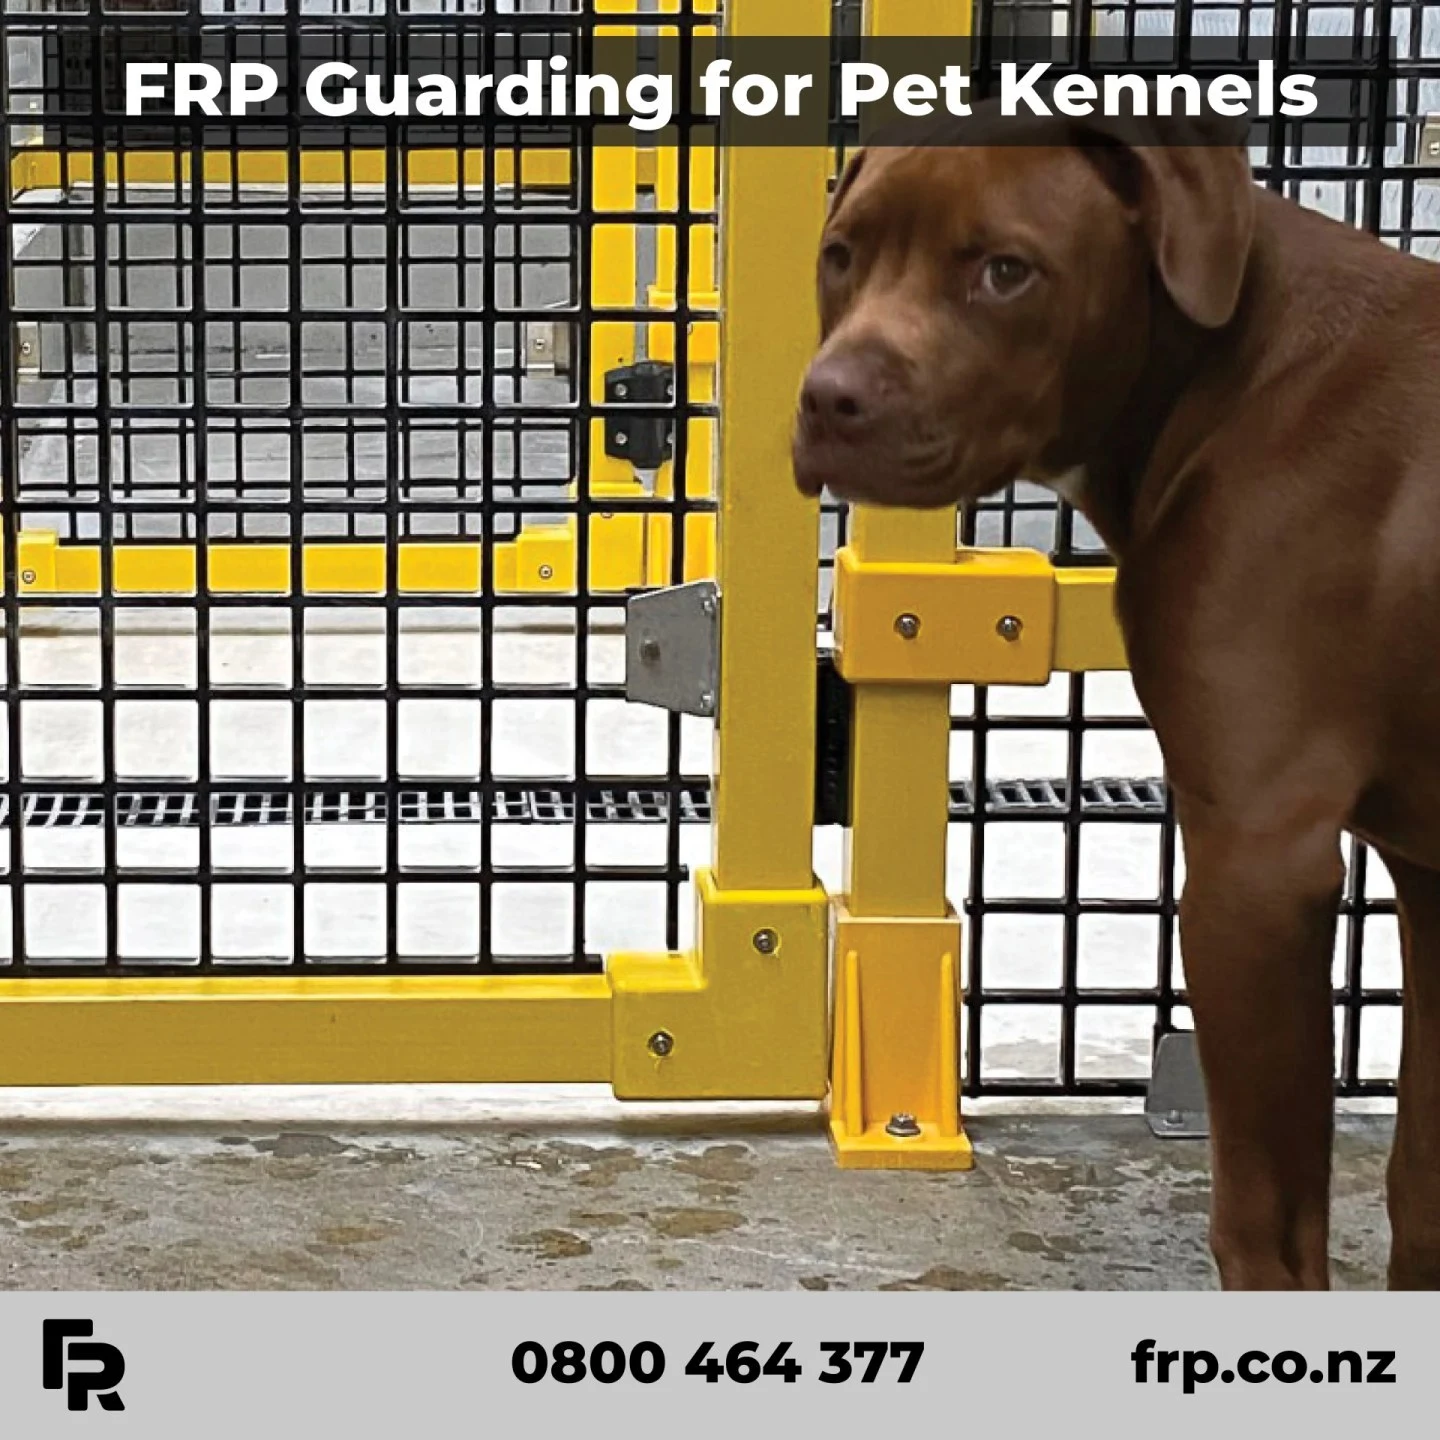 Our FRP Guarding is more durable and easier to clean down than timber.

#frp #frpproducts #guarding #kennels #petshelter #commercial #nzarchitects